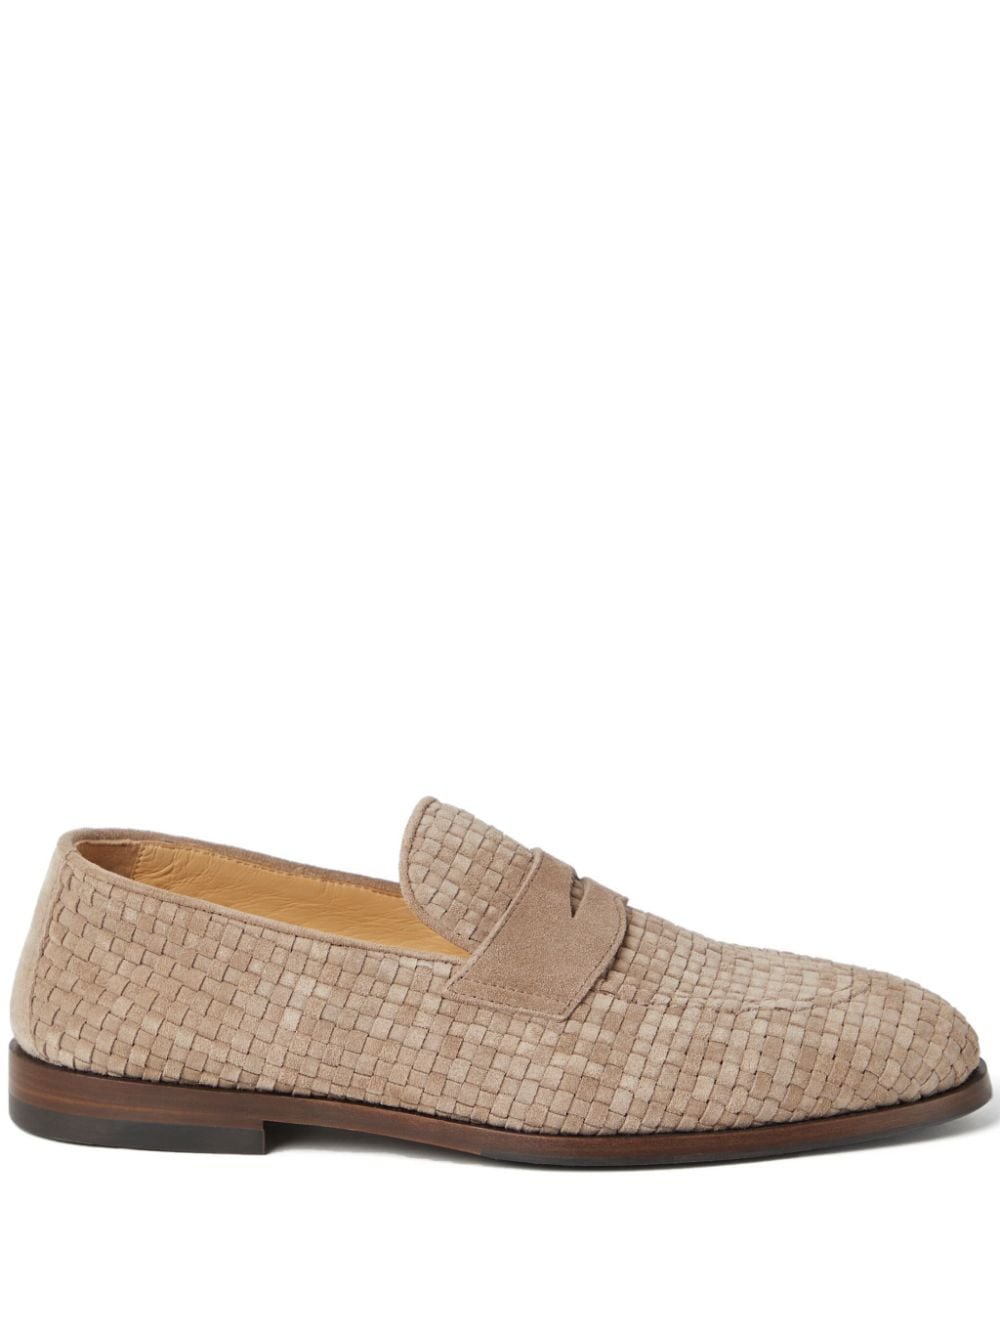 Image 1 of Brunello Cucinelli woven suede loafers